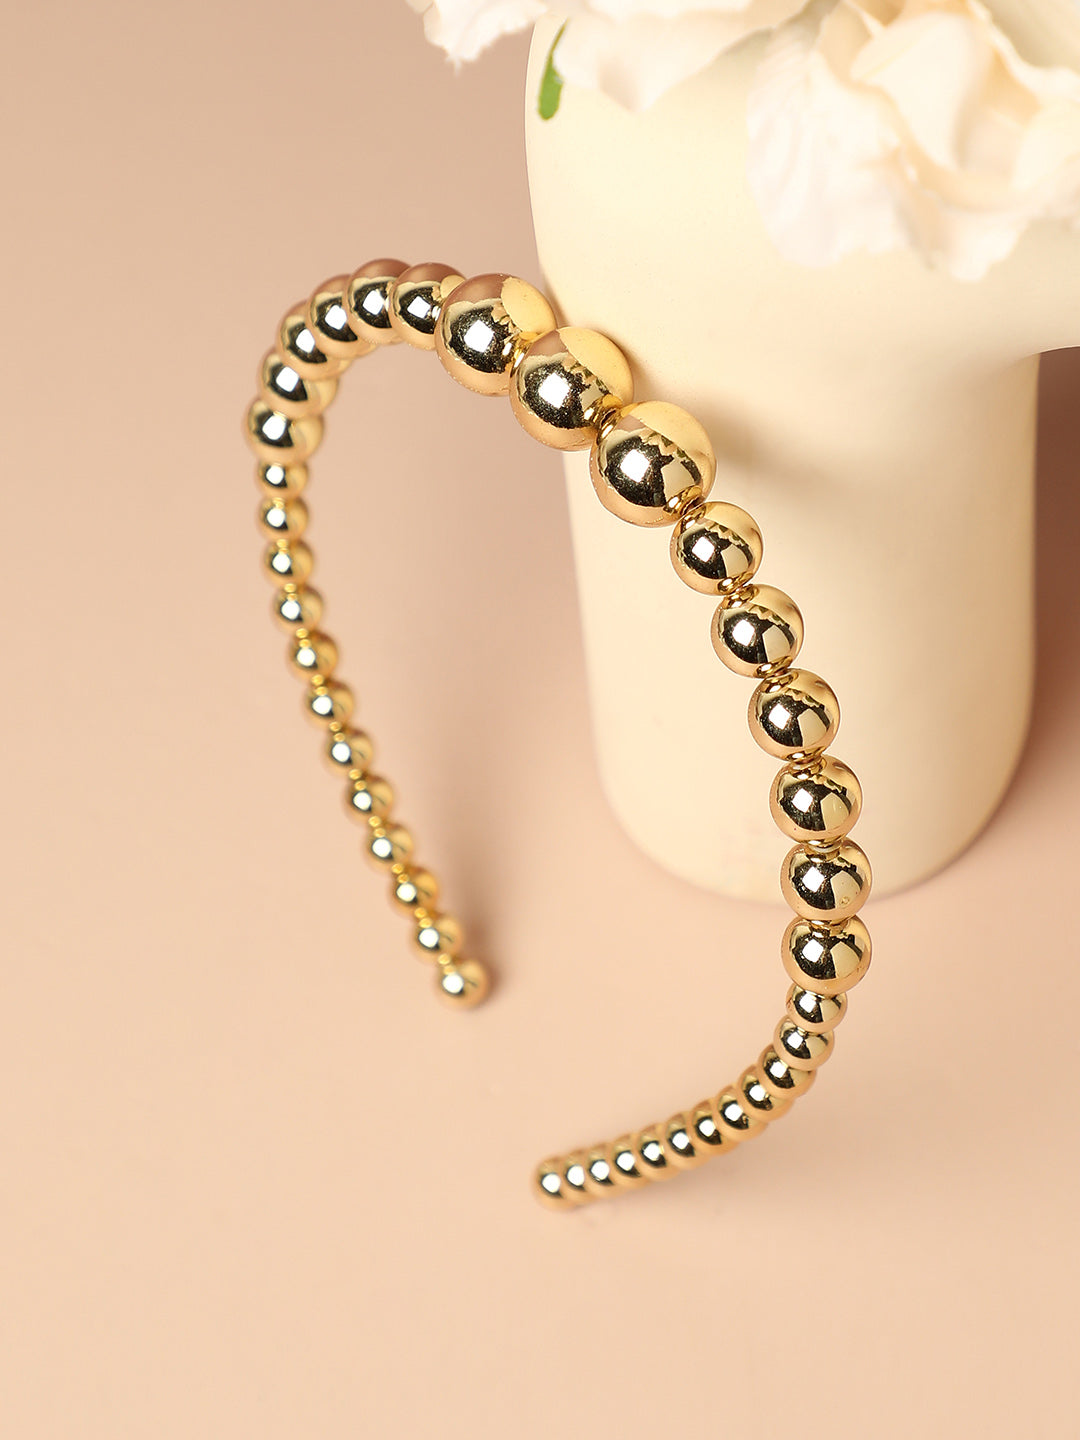 A Touch Of Glam: Elevate Your Hair With An Embellished Hairband